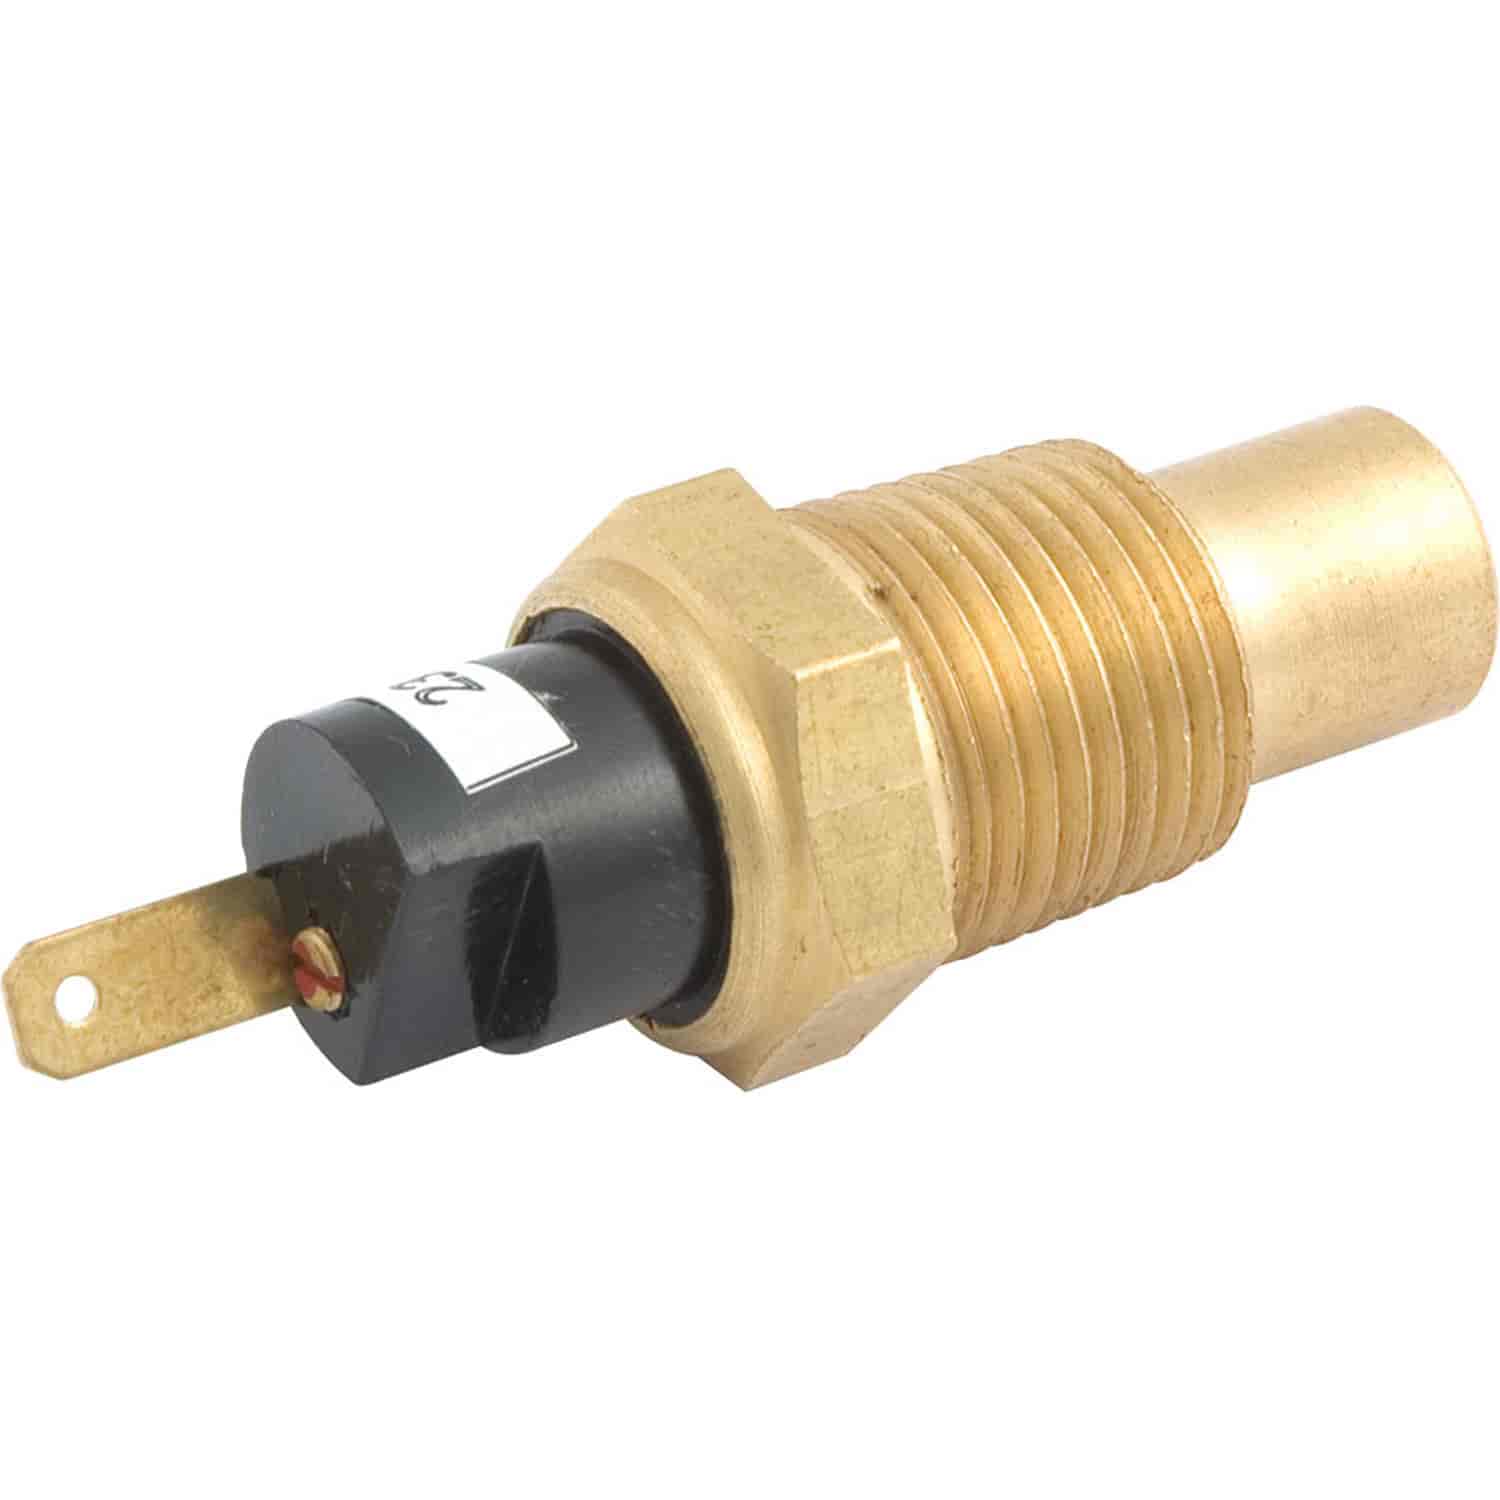 Replacement Water Temp. Switch 235 Degree